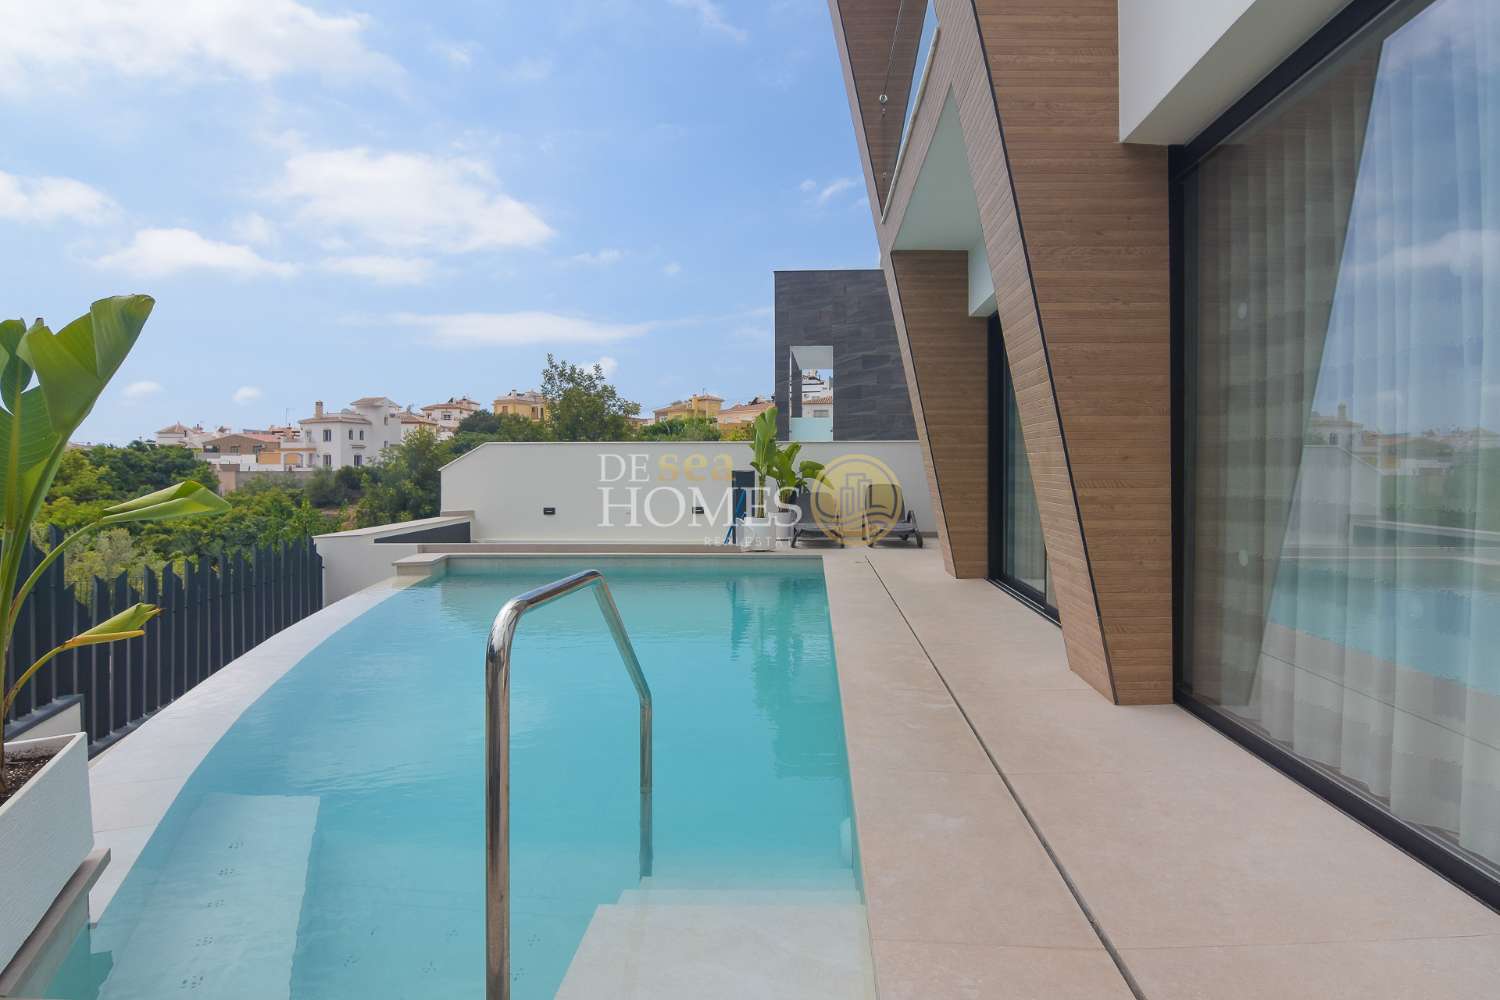 Ultra-modern villa with garage and private pool in Nerja